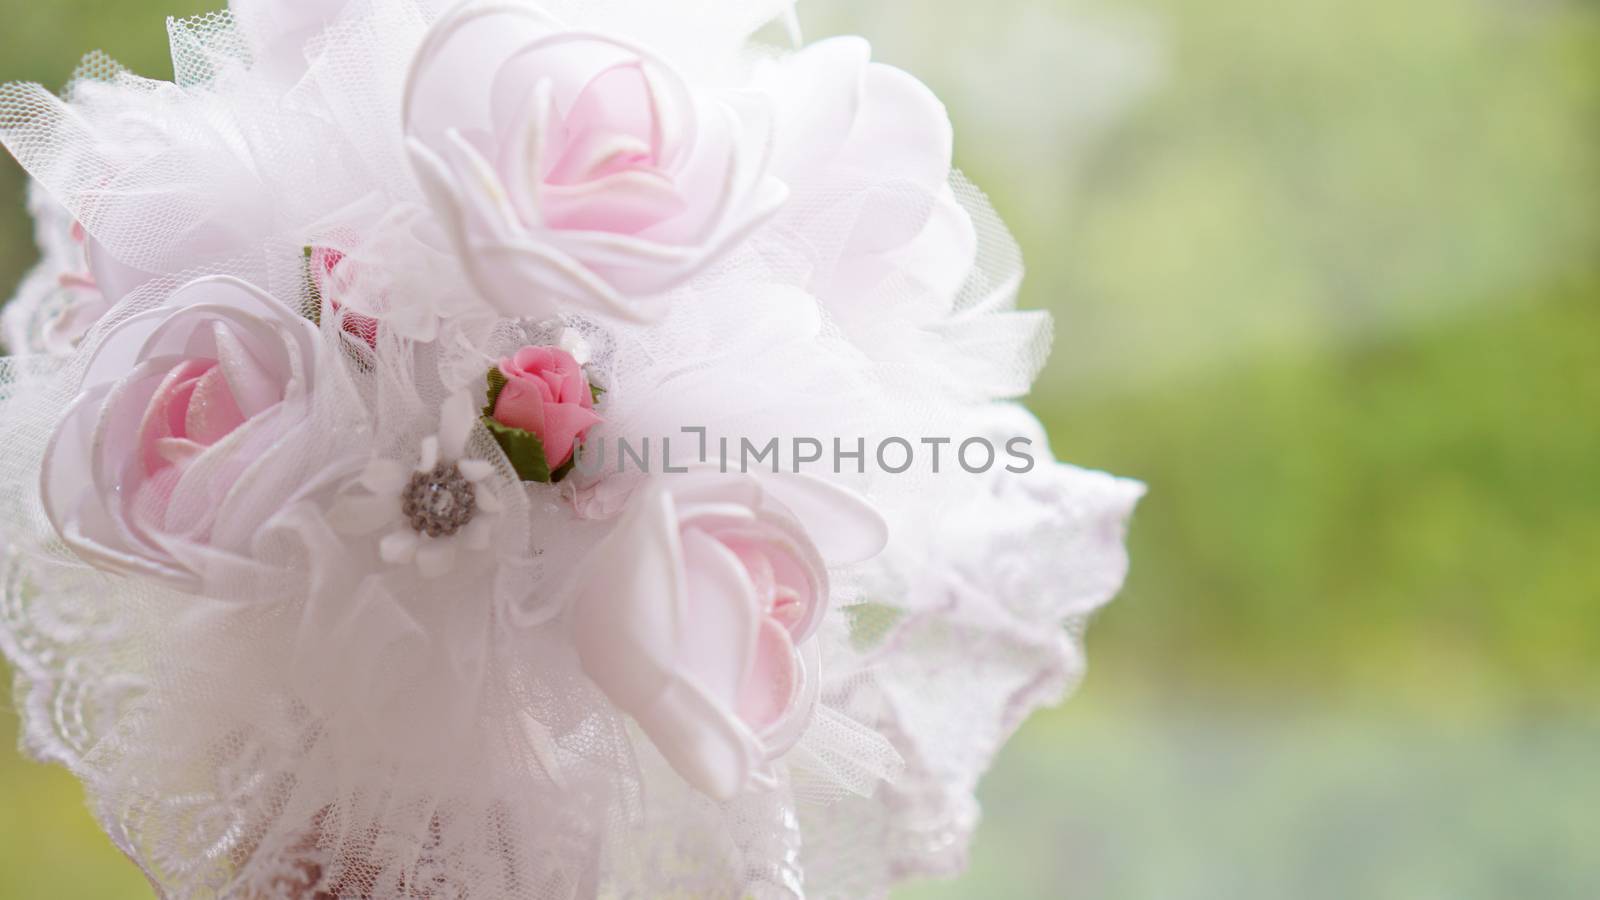 Wedding bouquet made of white roses on a blurred green background